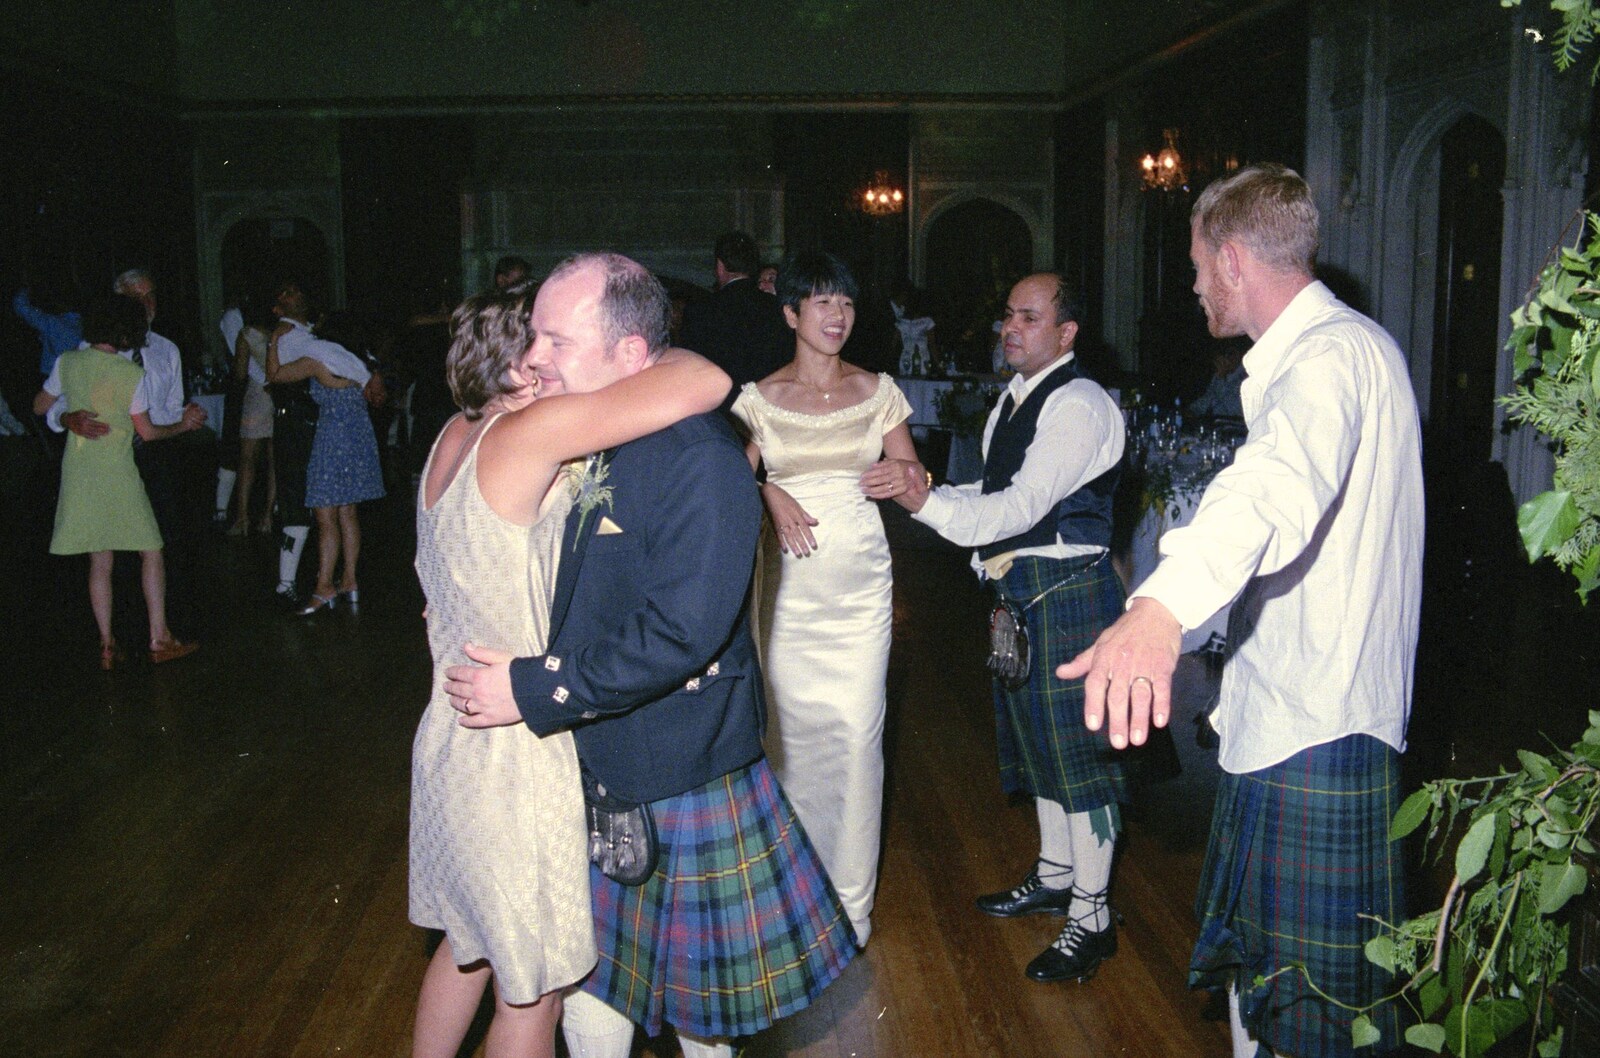 Hamish and Jane's Wedding, Canford School, Wimborne, Dorset - 5th August 1998: Some kind of smoochy dance occurs